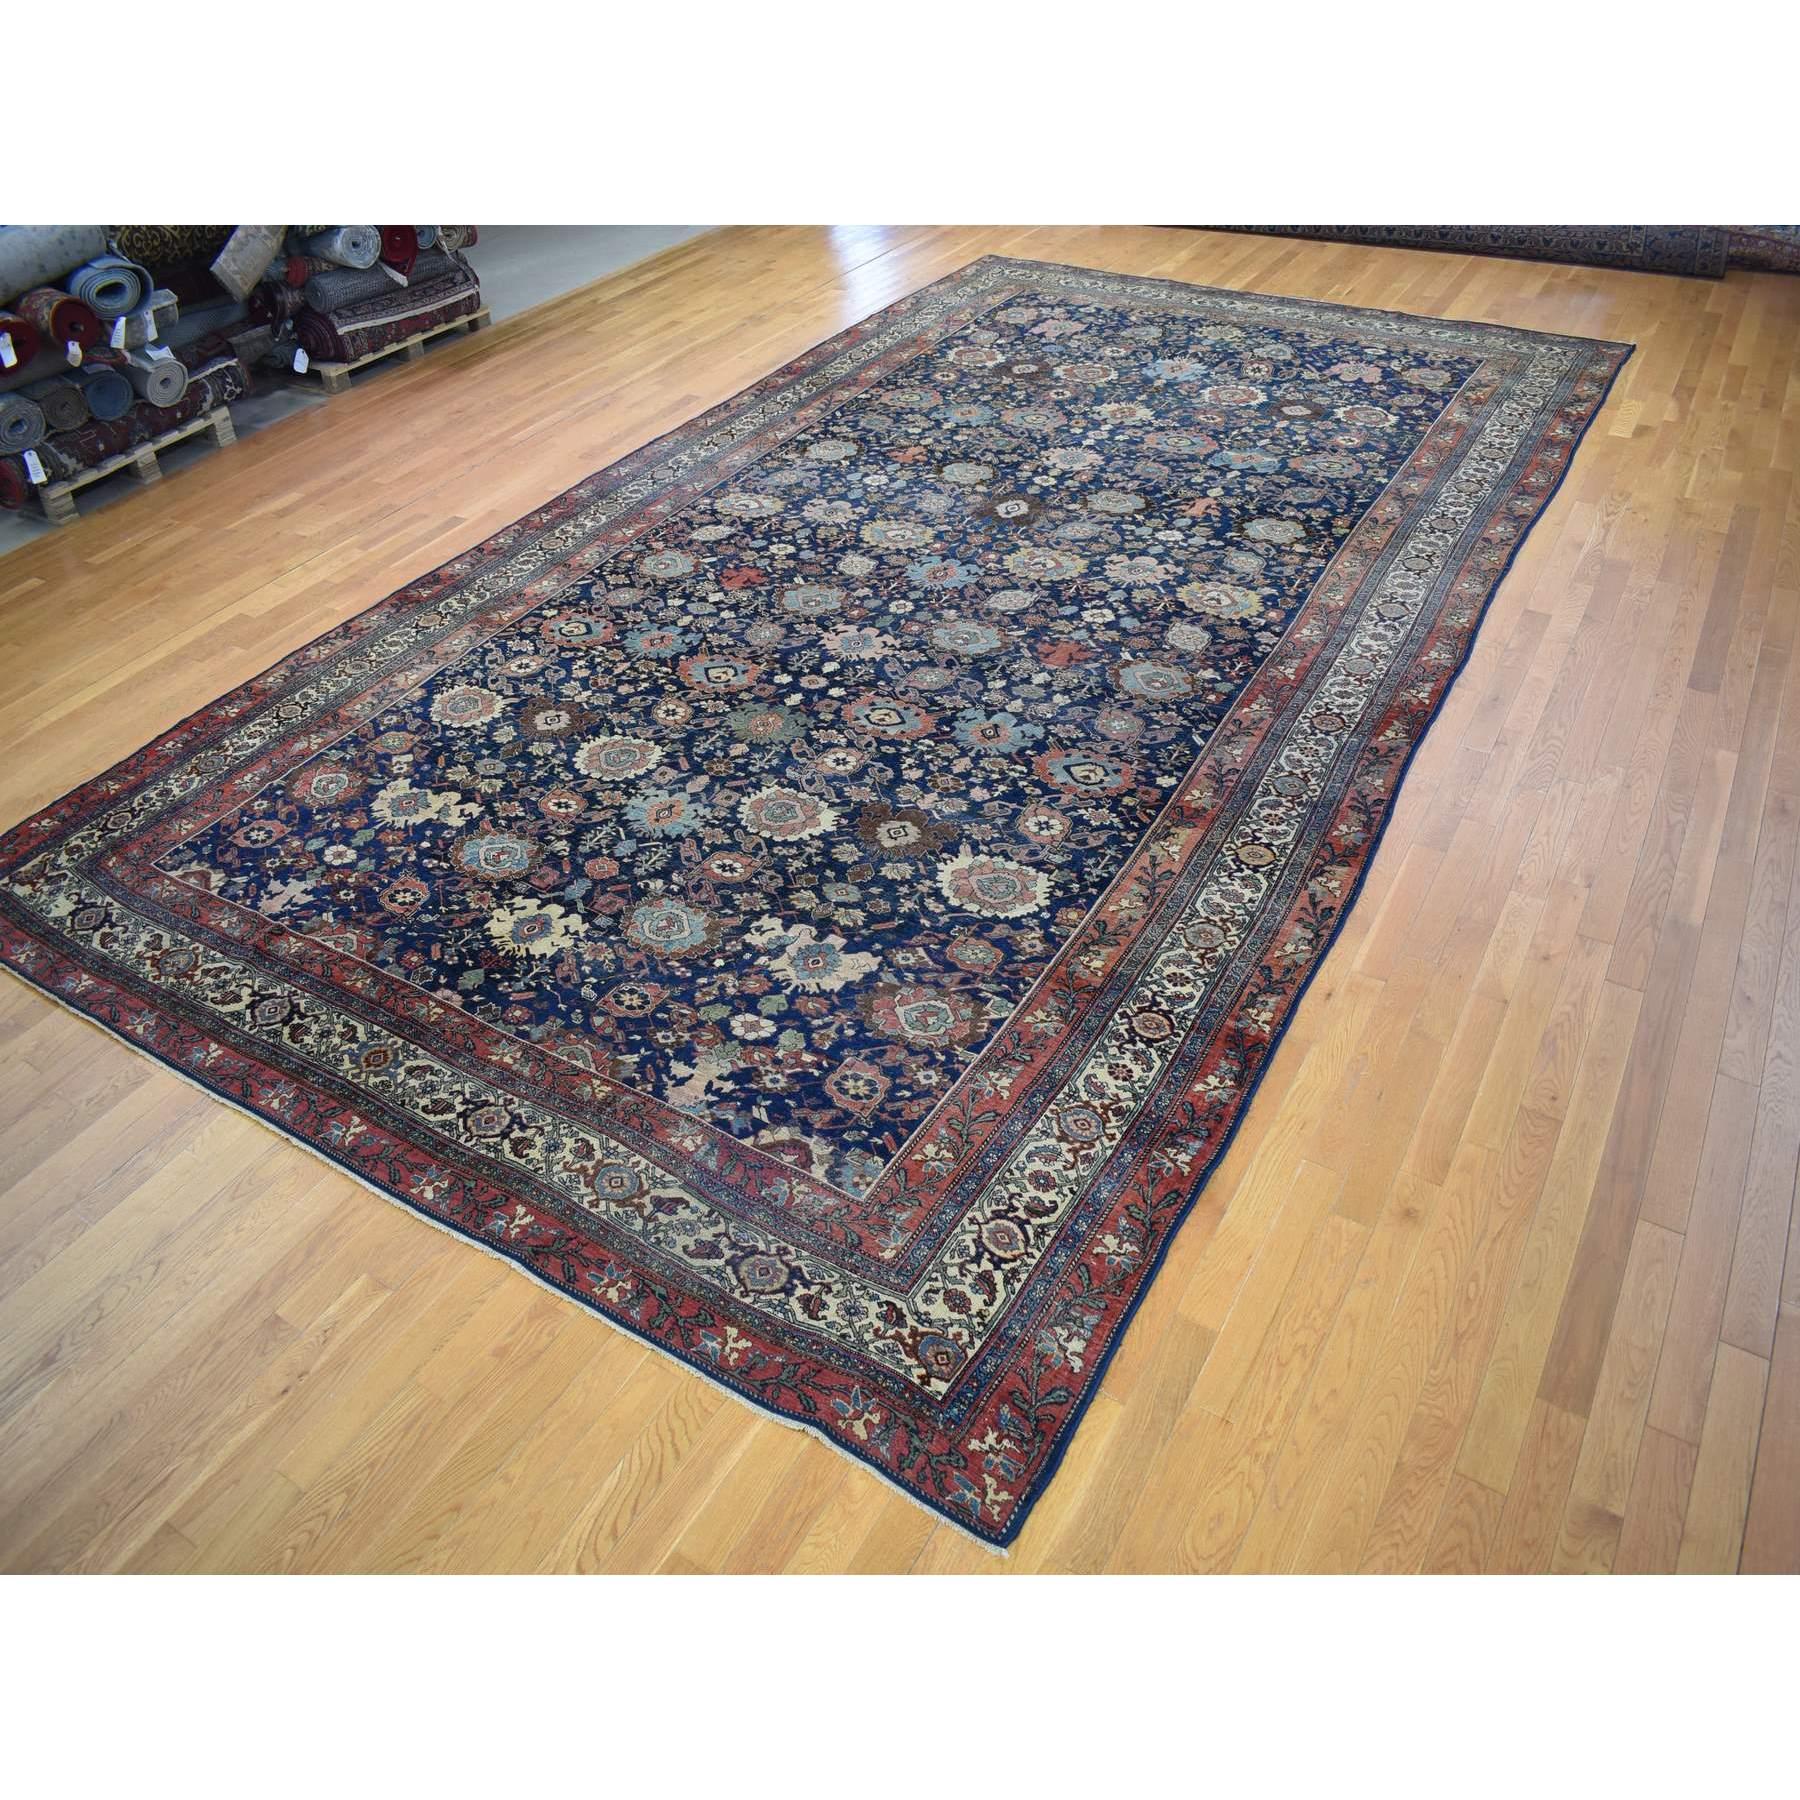 Medieval Navy Blue, Antique Persian Bijar, Even Wear, Hand Knotted, Oversized Wool Rug For Sale